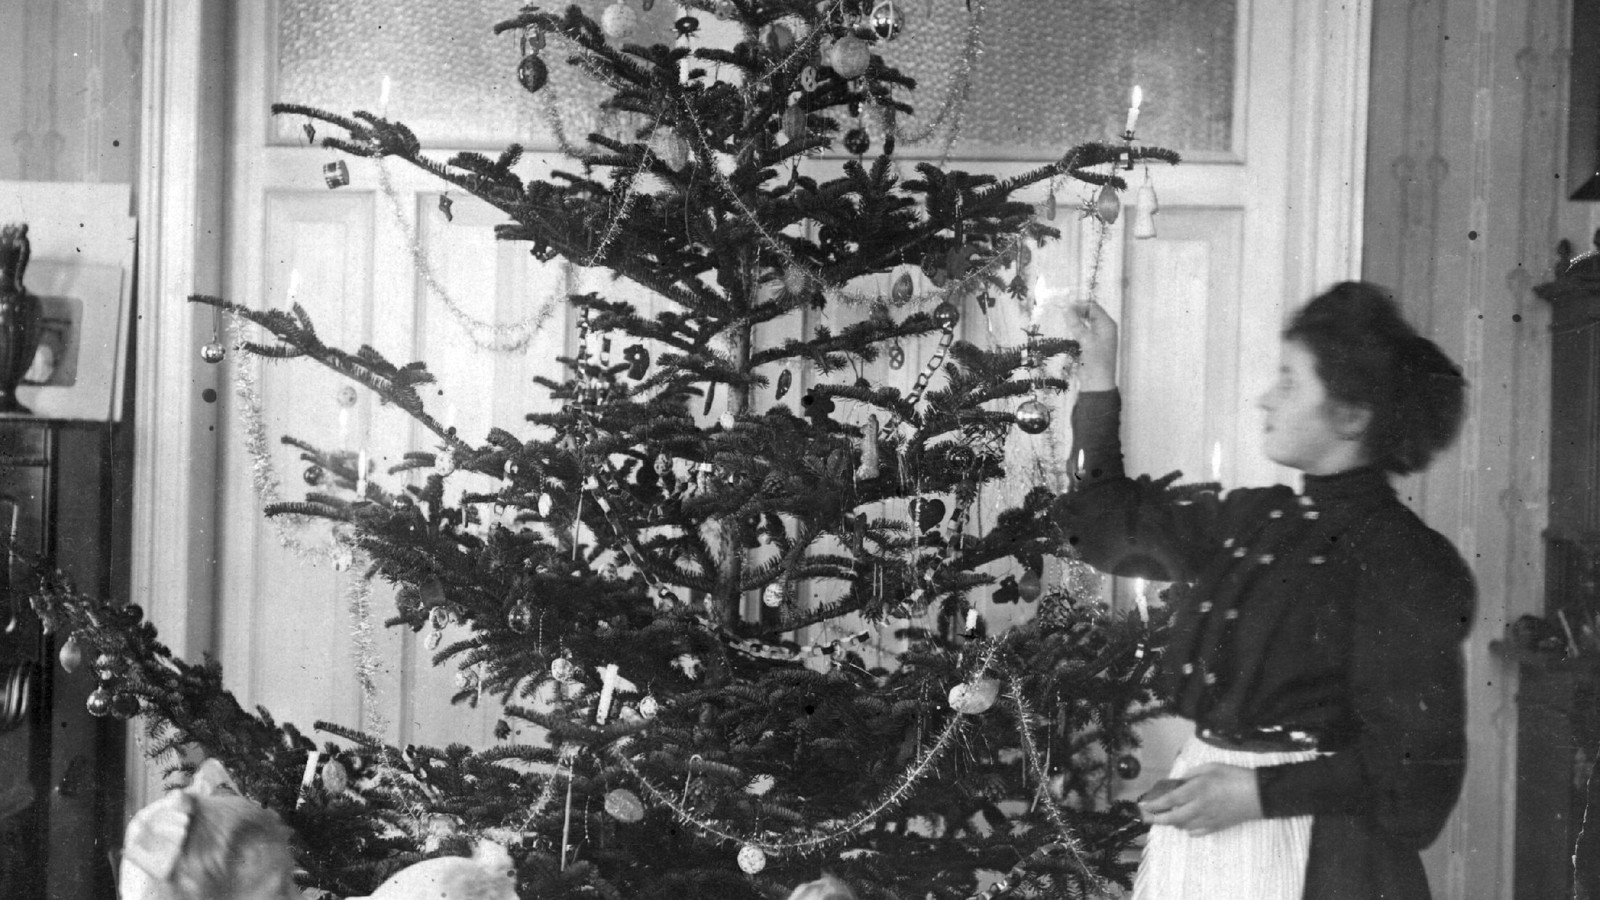 This Christmas tree was photographed circa 1885. It is decorated